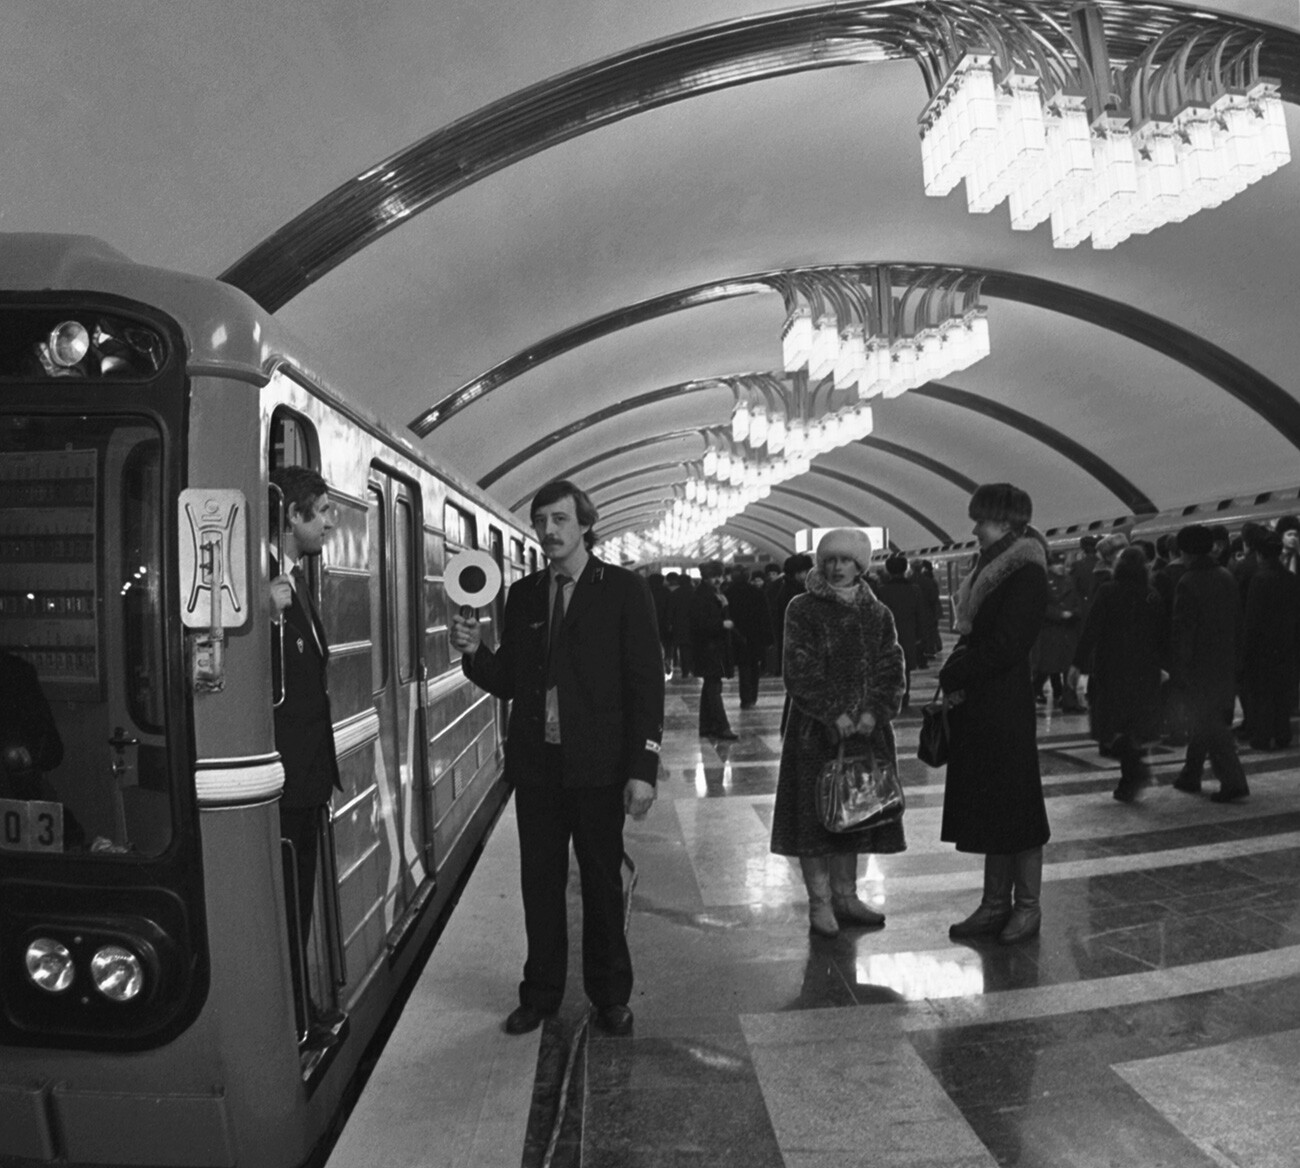 Kuybyshev metro was opened on December 26, 1987. At the 'Pobeda' station